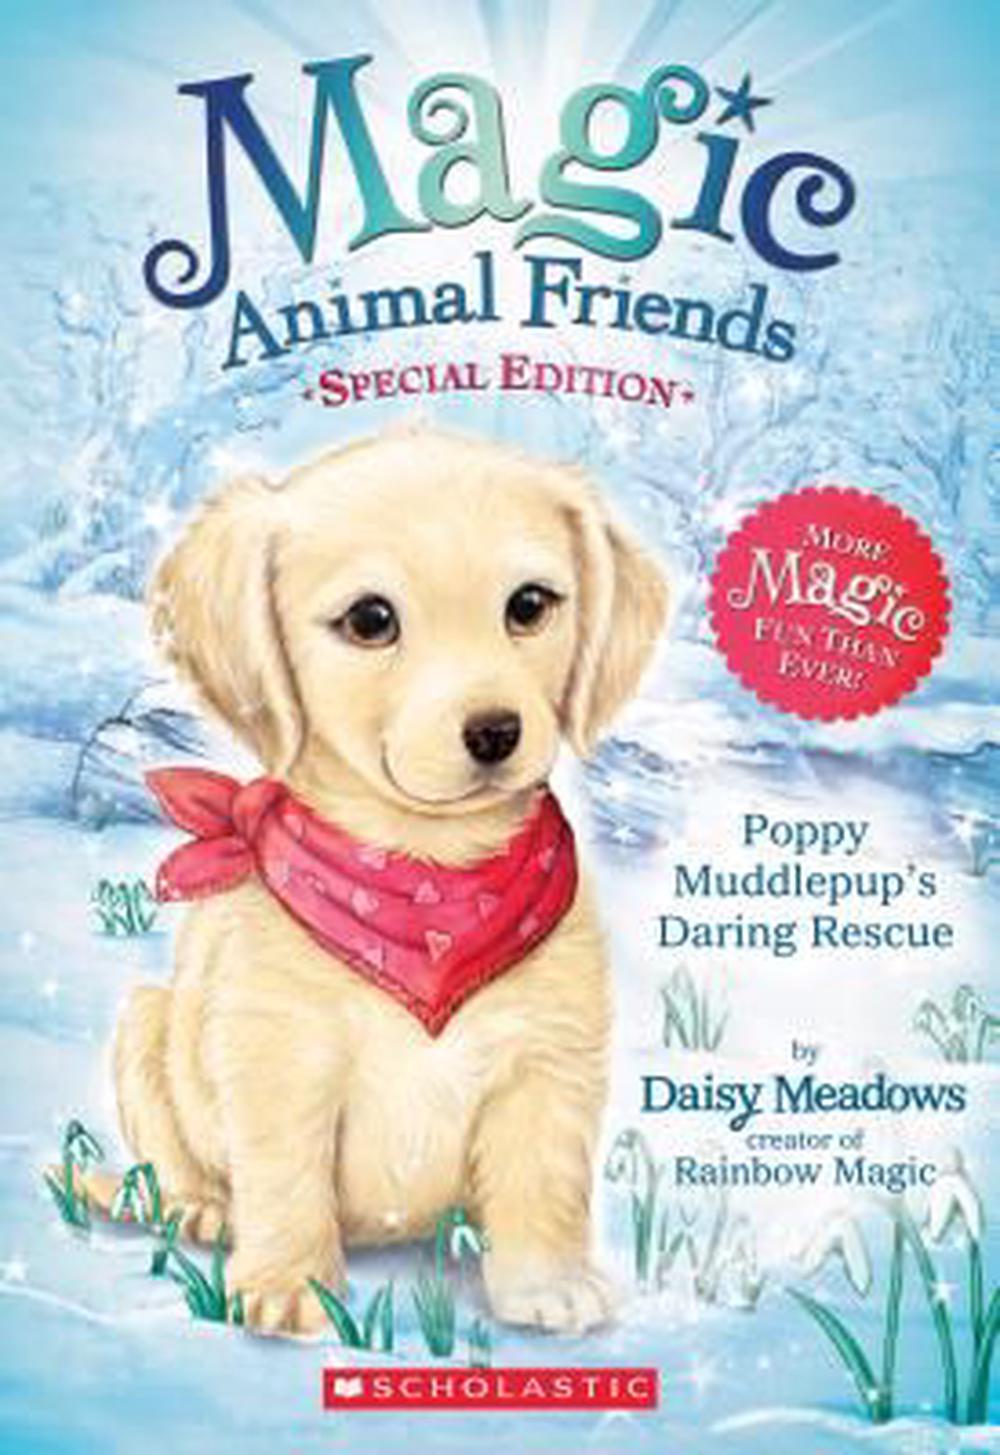 96 Best Seller Animal Friends Book Series for business